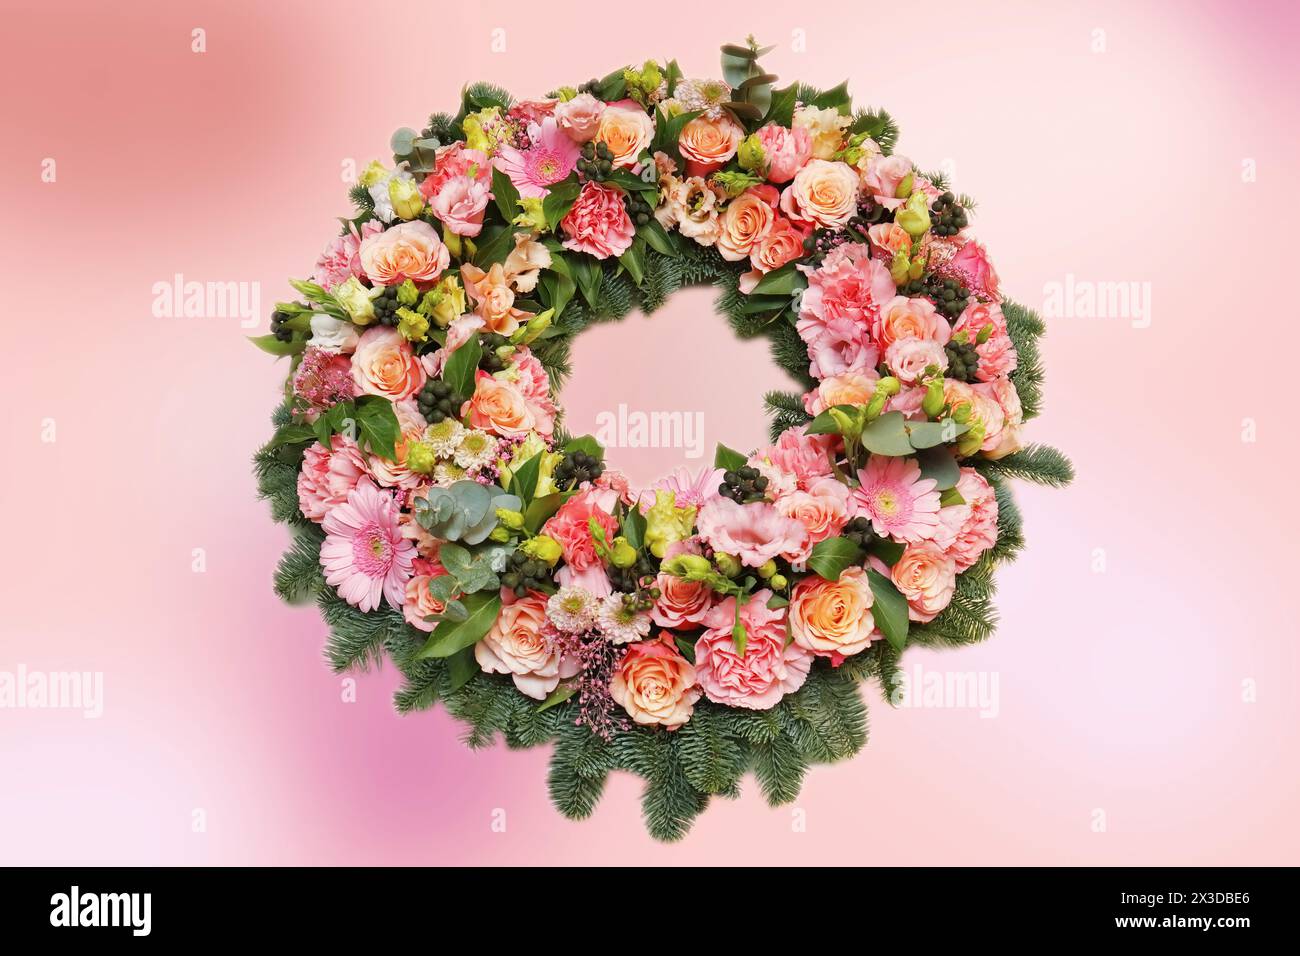 funeral wreath with pink blossoms Stock Photo